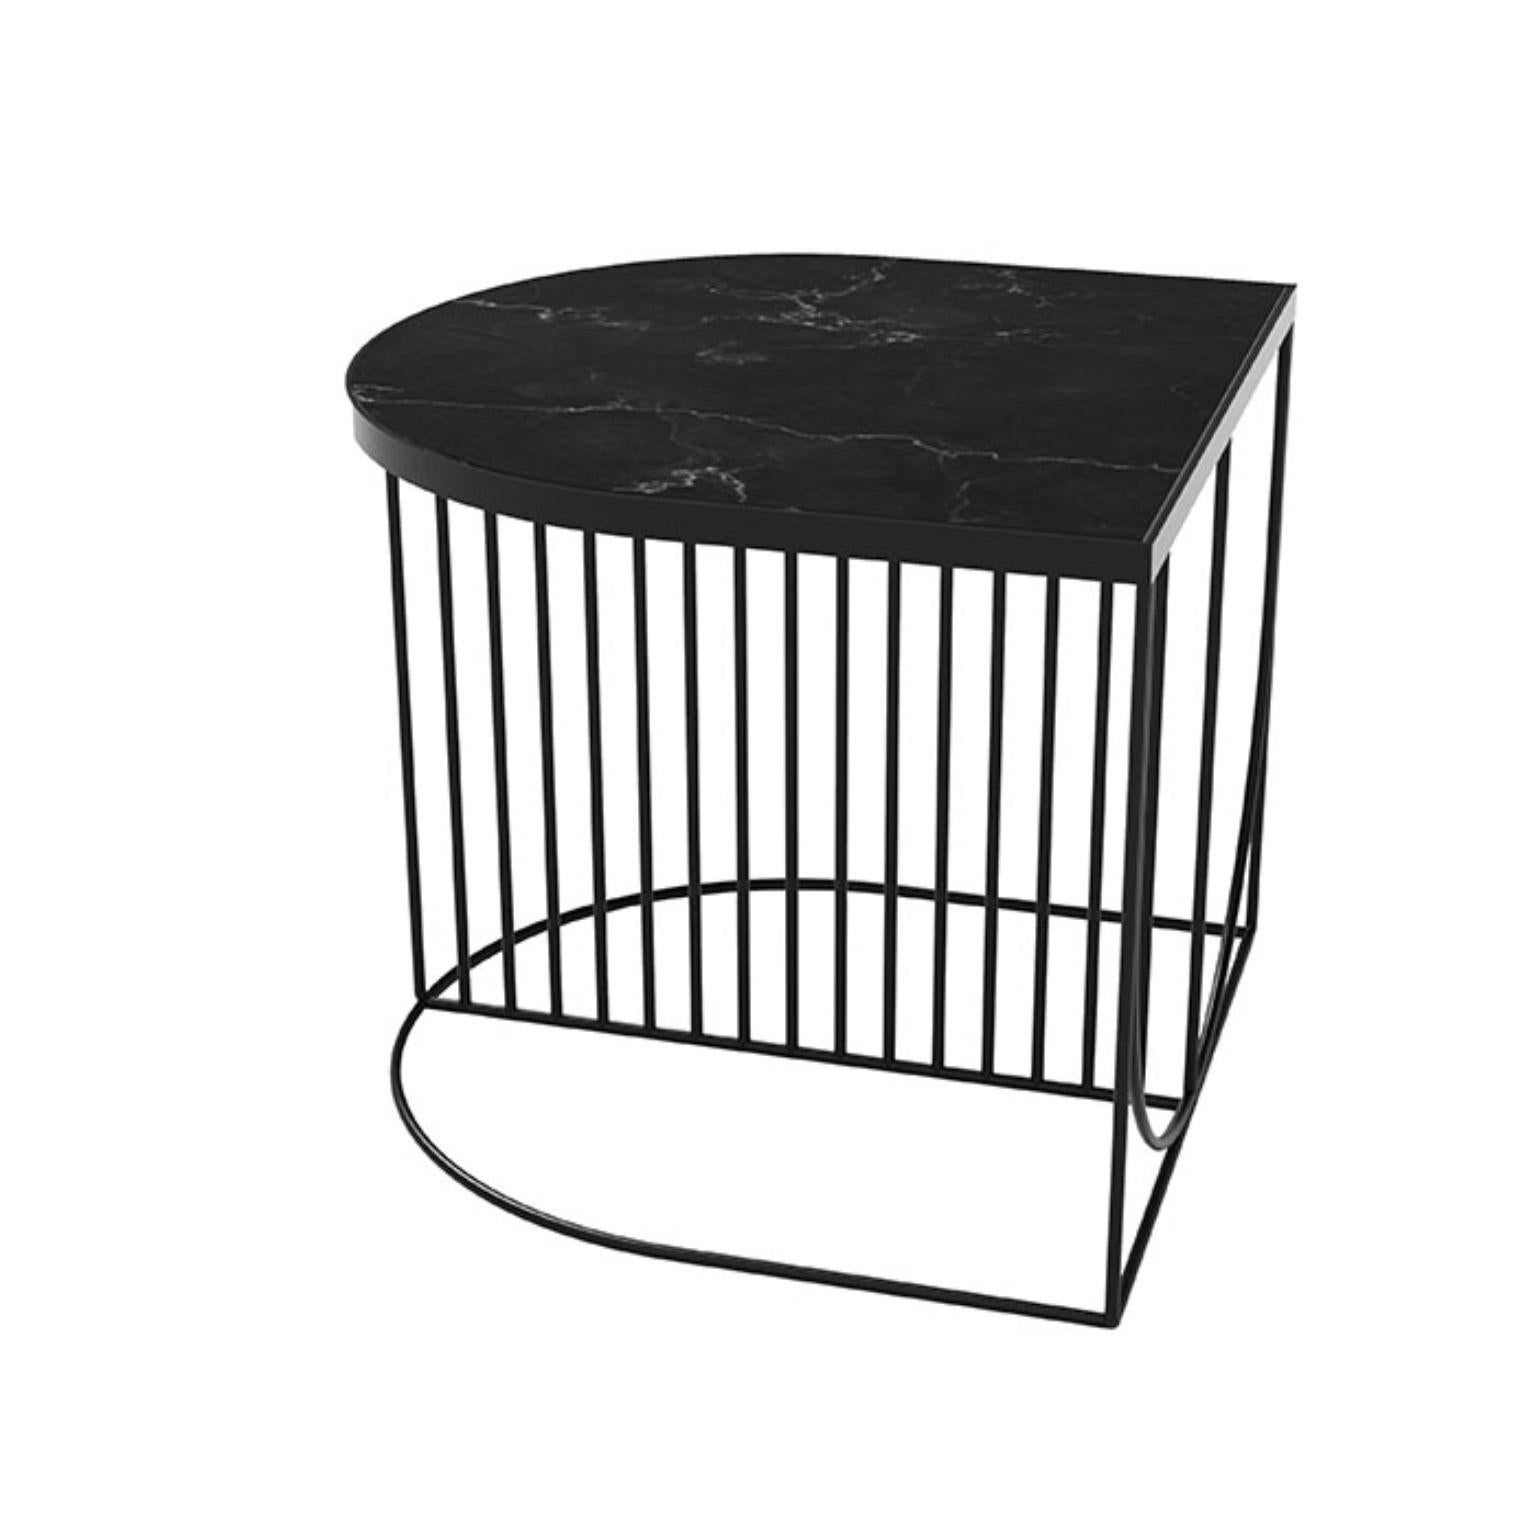 Black marble and steel contemporary side table
Dimensions: L 50 x W 50 x H 44.3 cm
Materials: Marble, steel  

This series consists of three different designs that you can combine in many different ways. The table tops come in two different